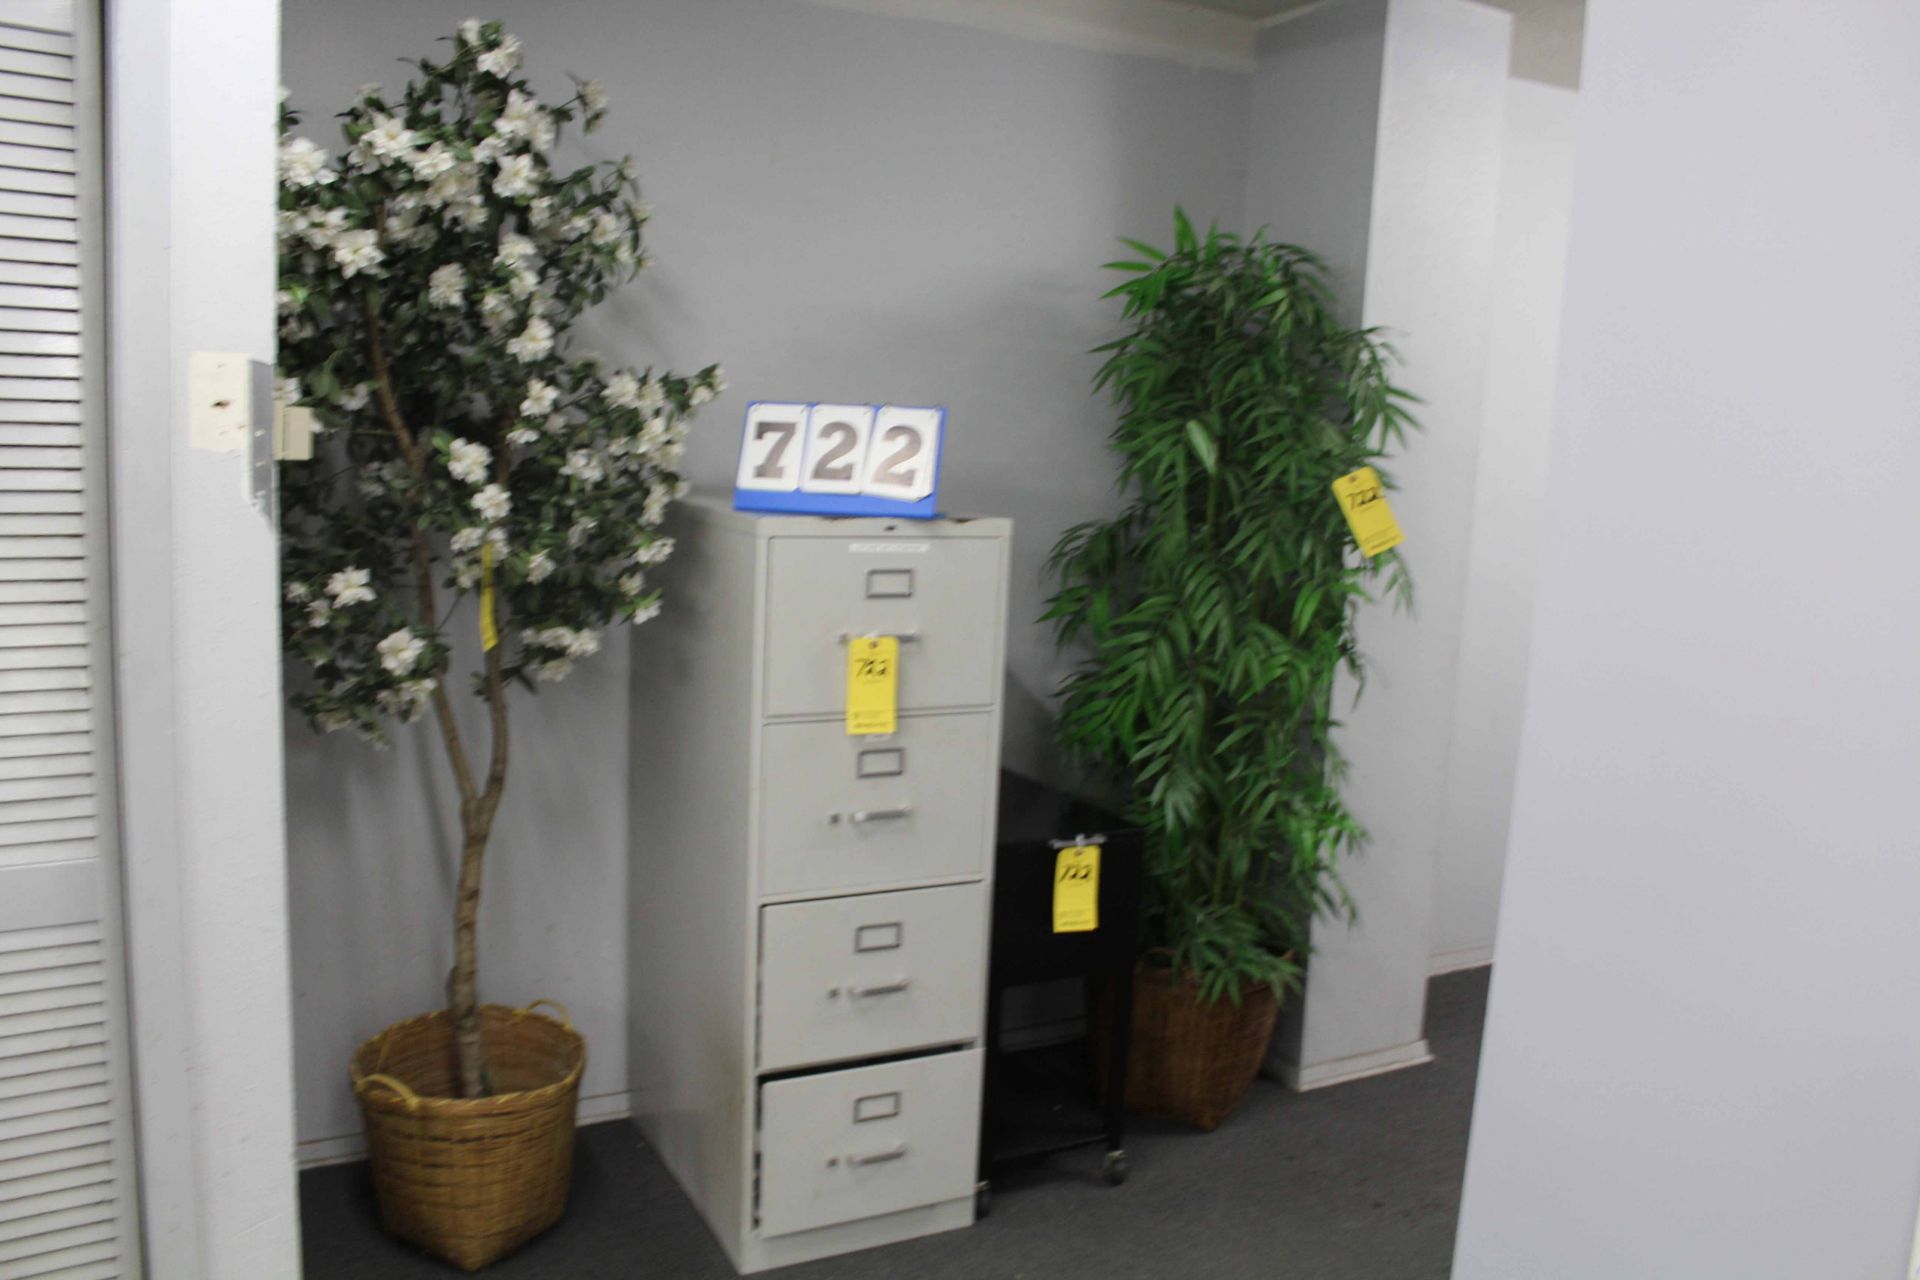 LOT CONSISTING OF: file cabinets, artificial plants